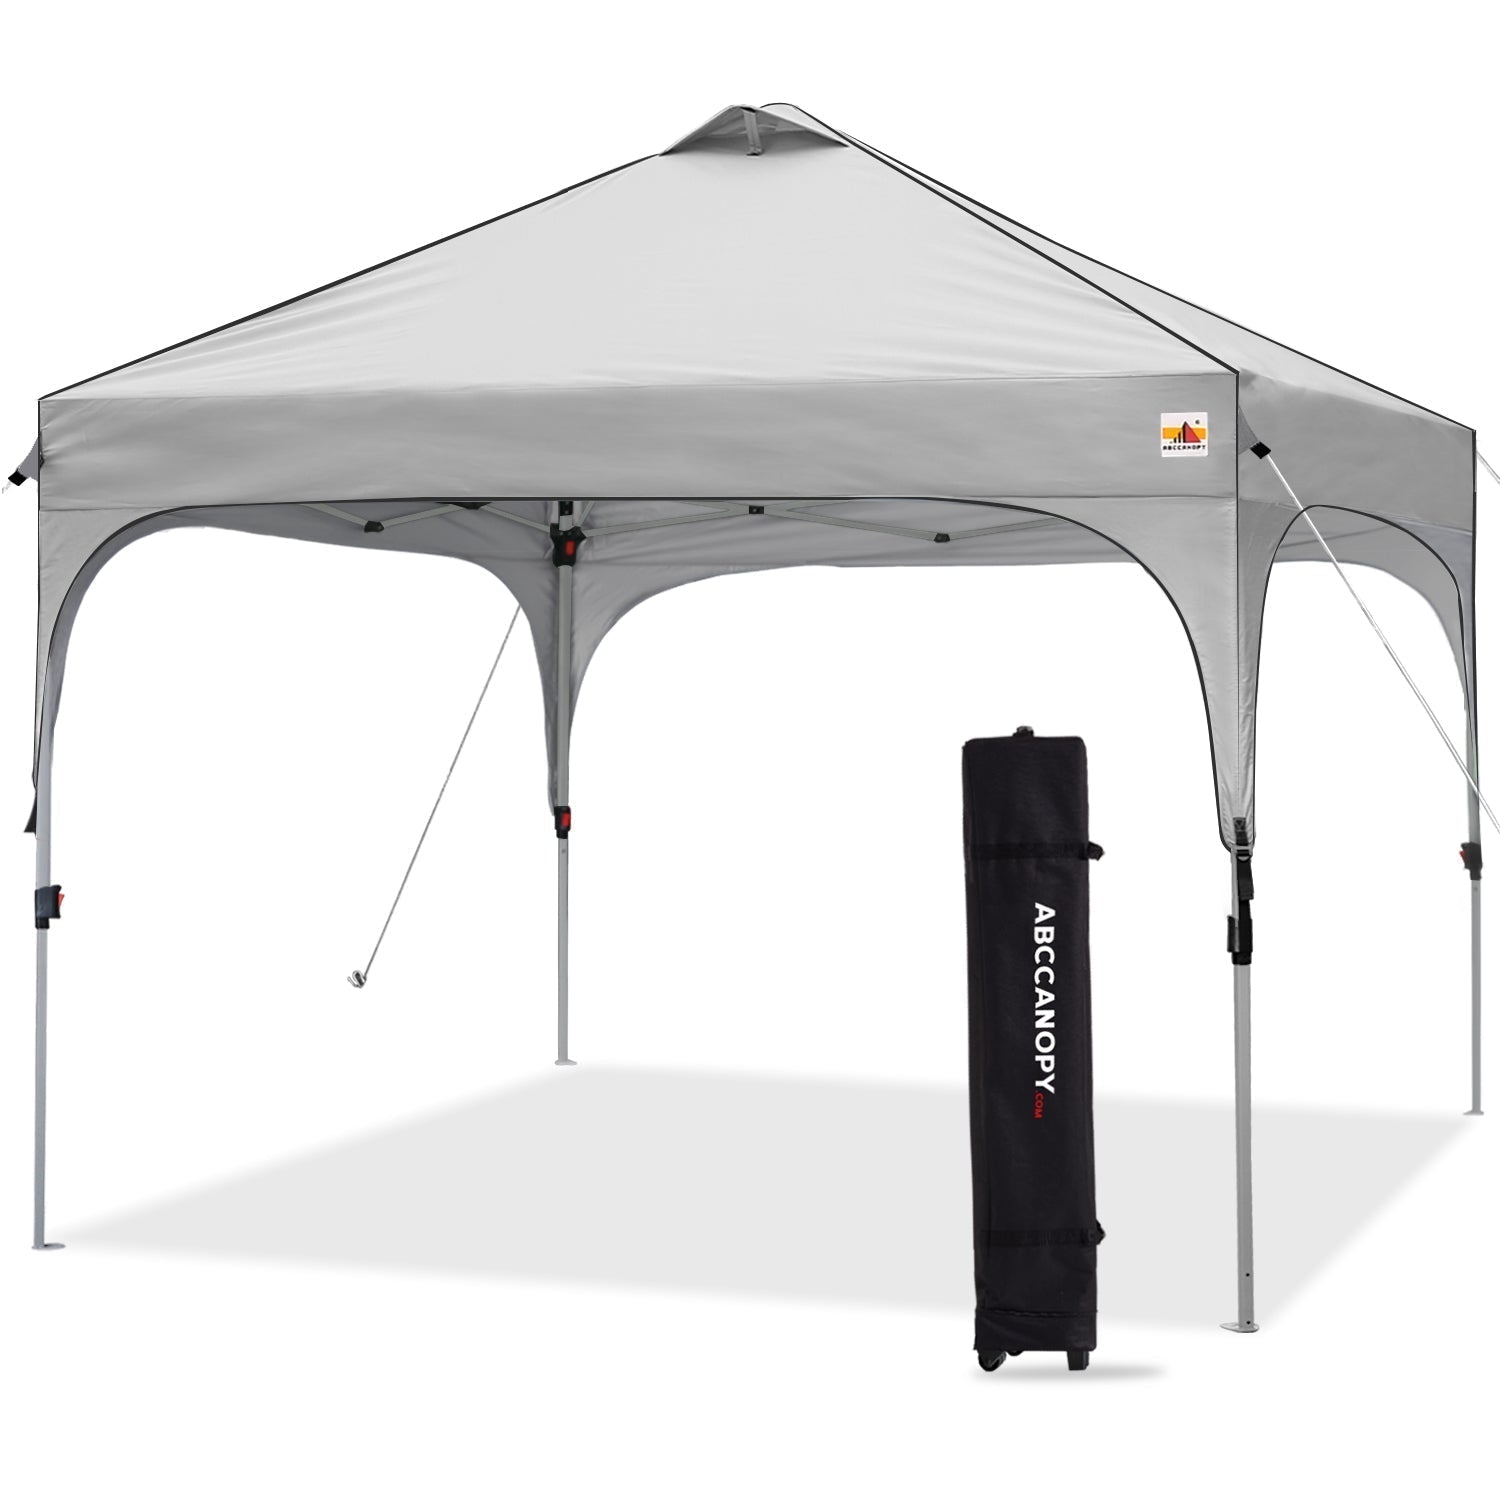 Compact Pop-up Instant Portable Canopy 10x10 for Camping, Beach